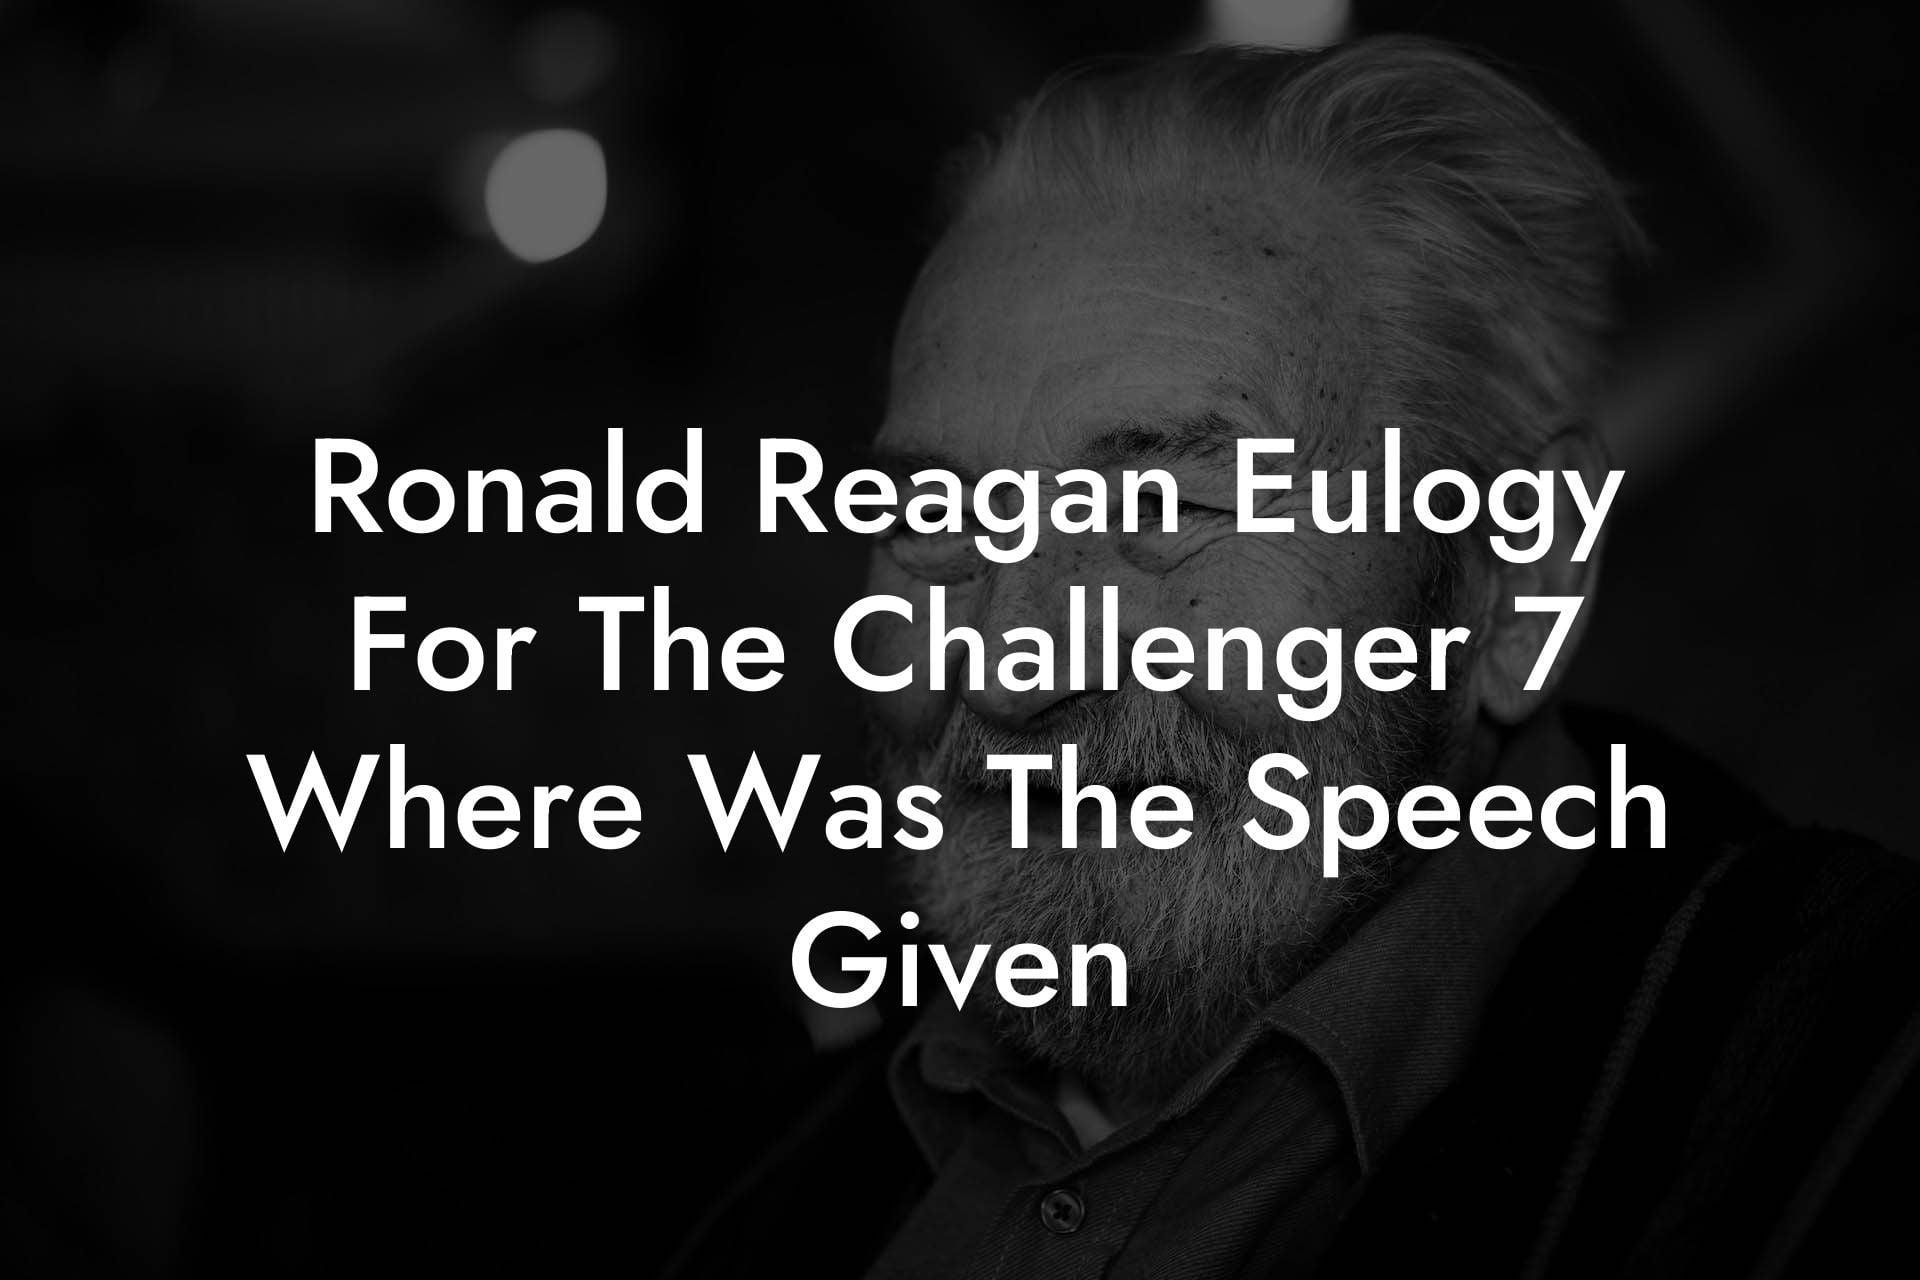 Ronald Reagan Eulogy For The Challenger 7 Where Was The Speech Given